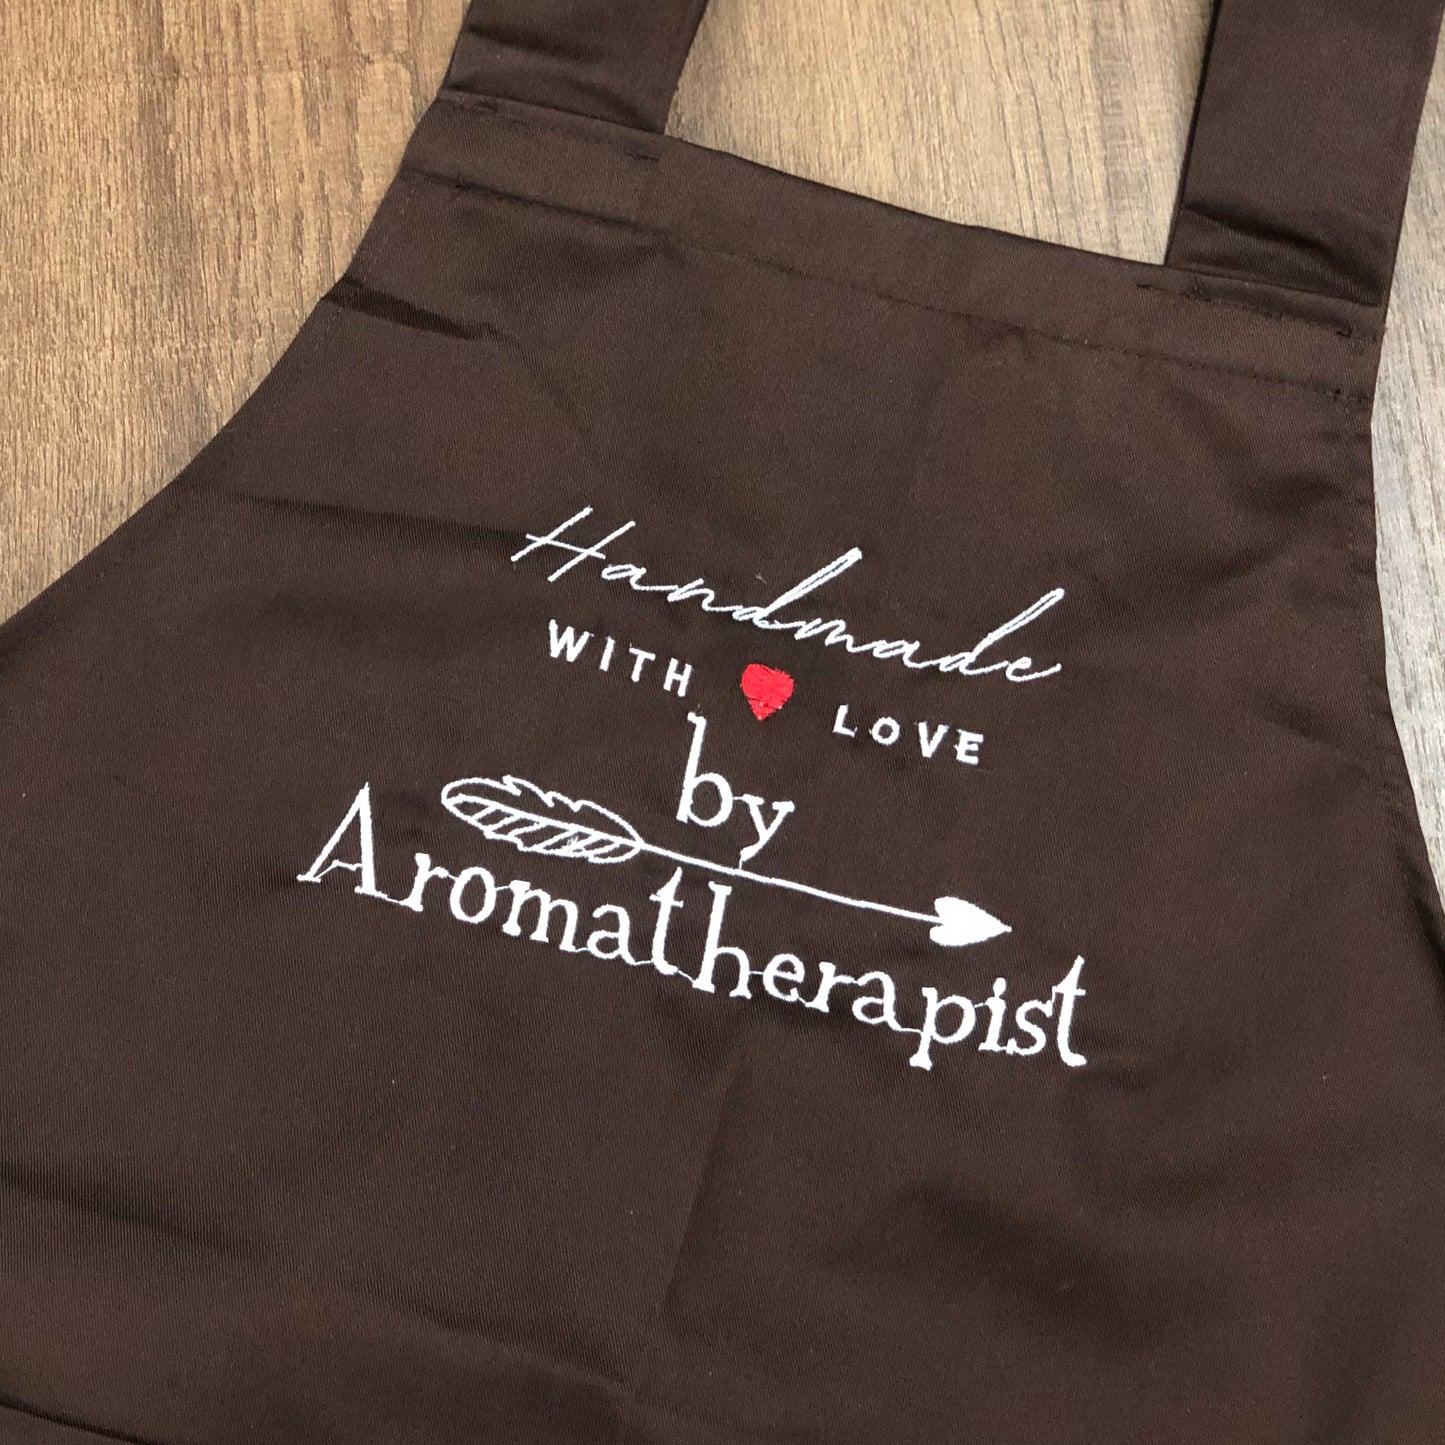 By Aromatherapist Apron with Adjustable Buttons - Brown    芳療師的精油生活圍裙 - 棕色